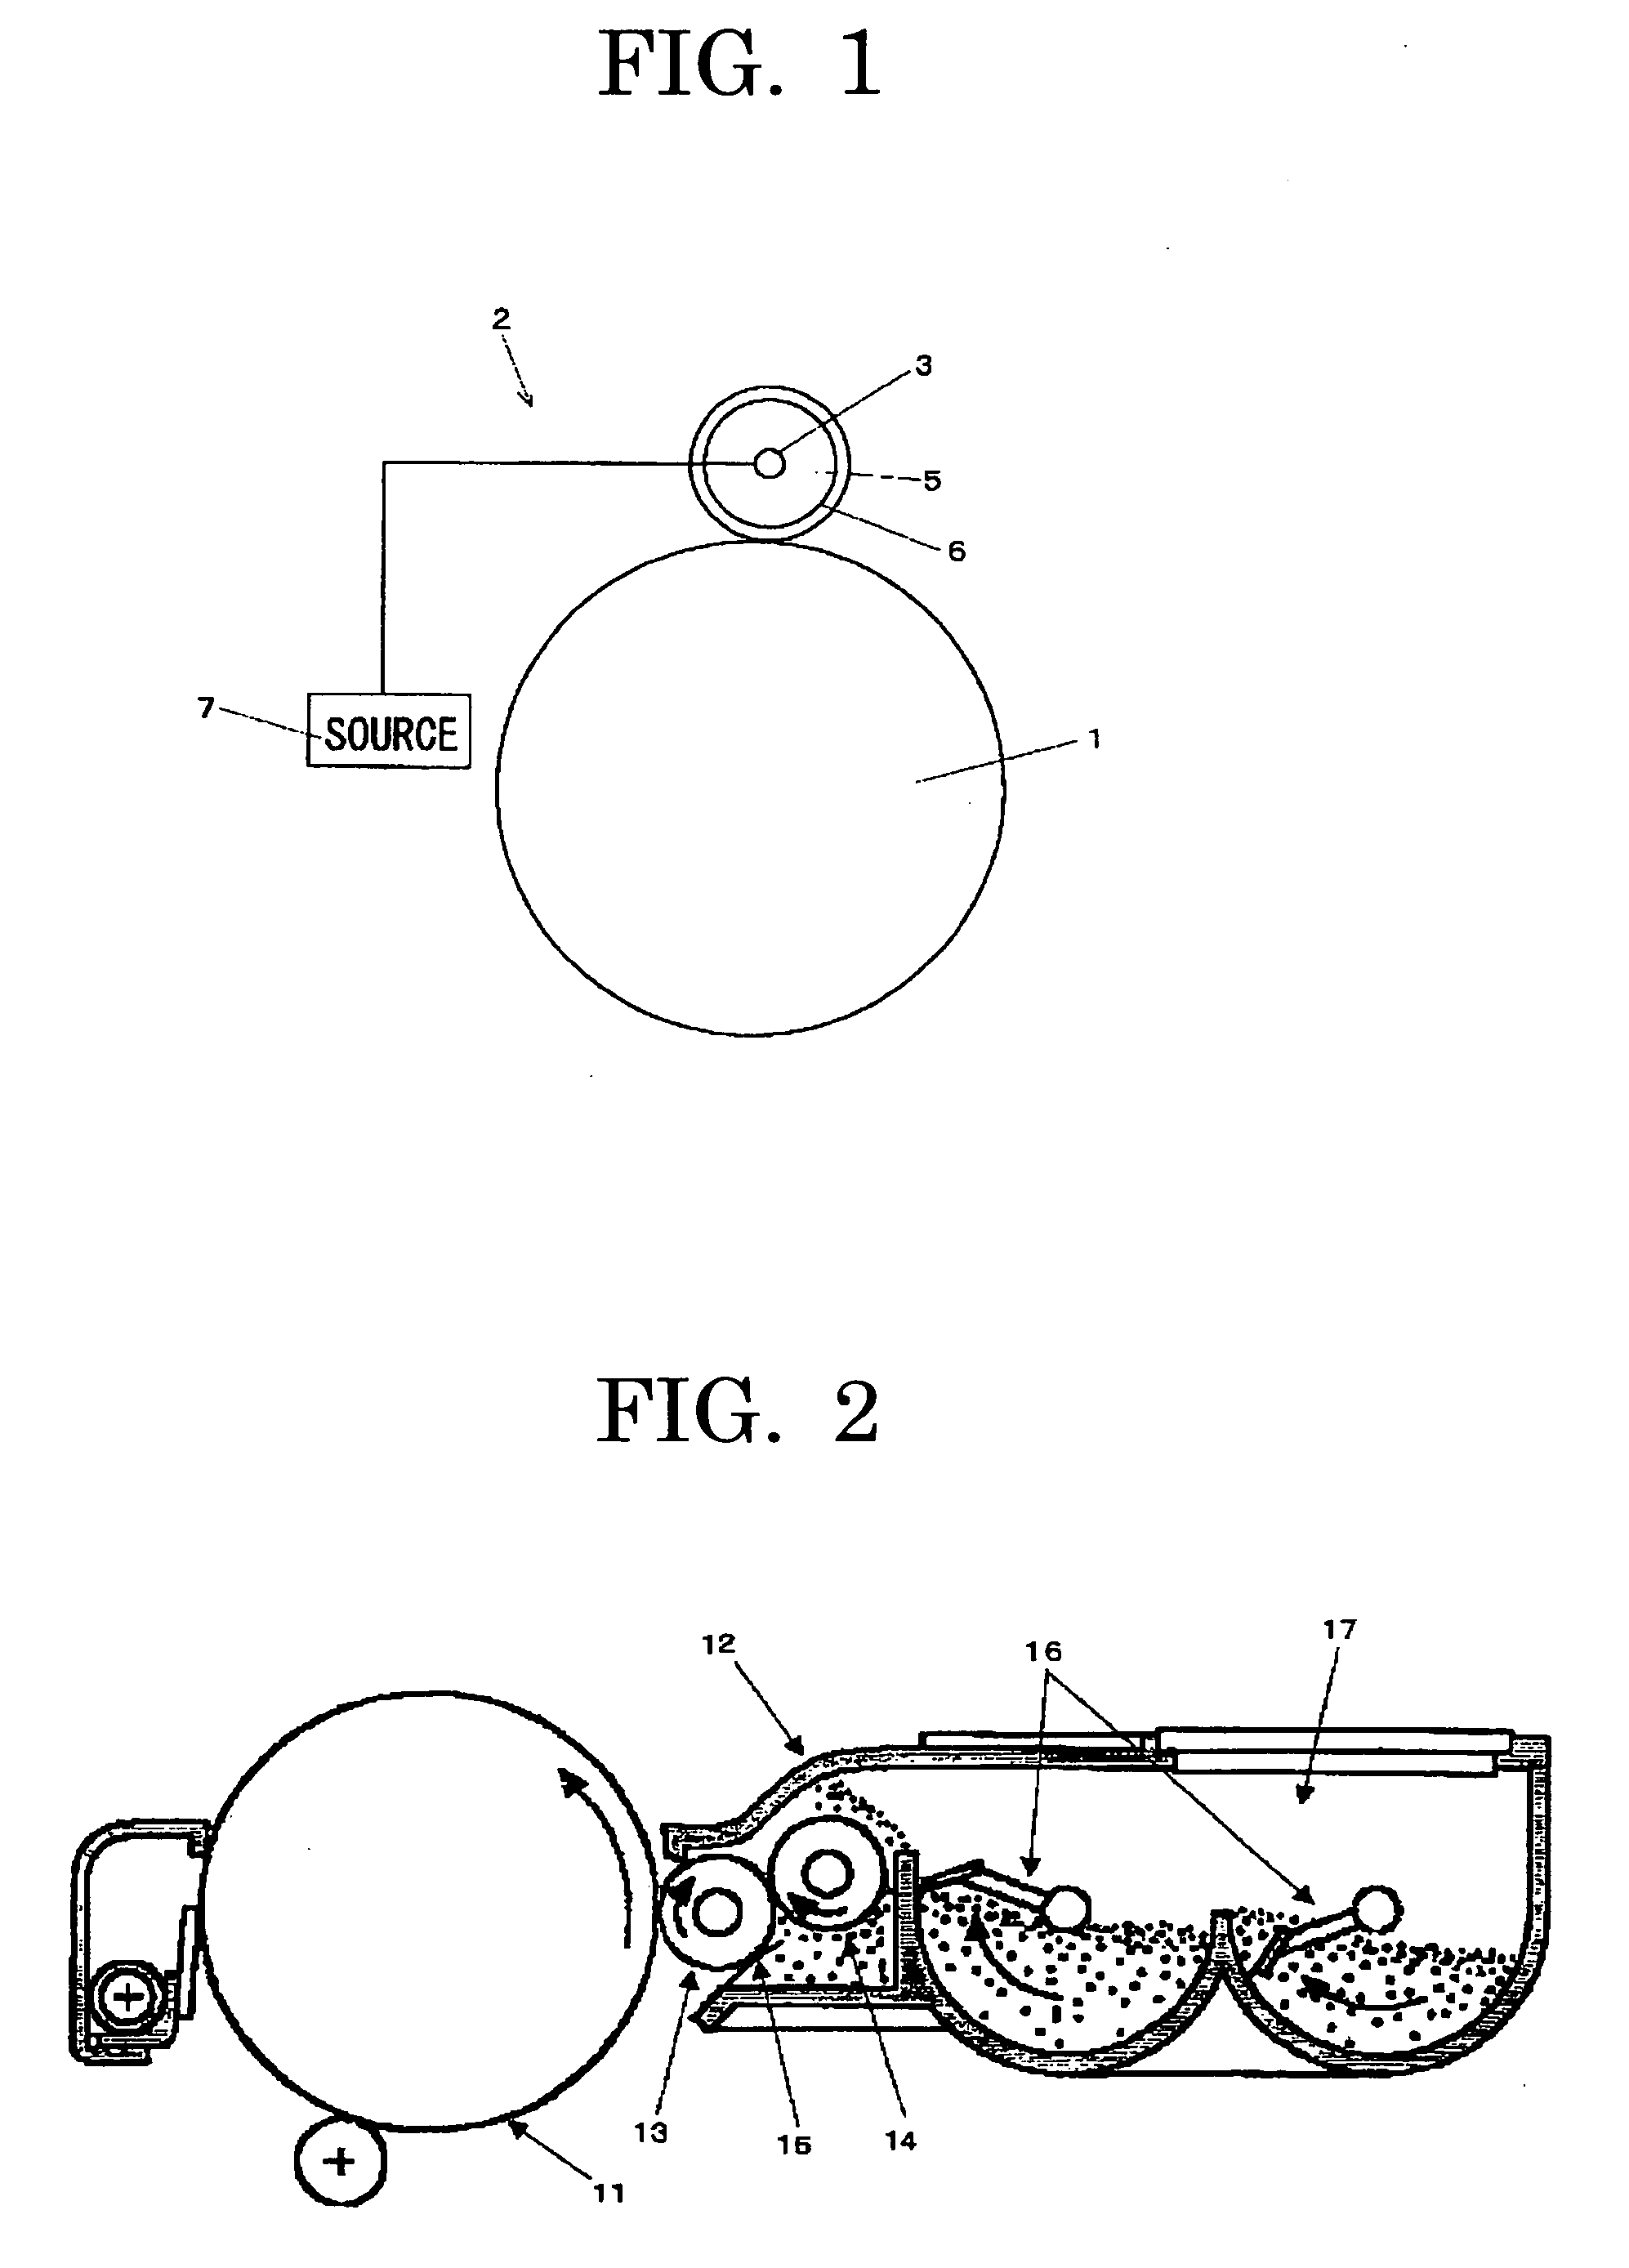 Toner for electrostatic development, developer, image forming method, image-forming apparatus and process for cartridge using the same